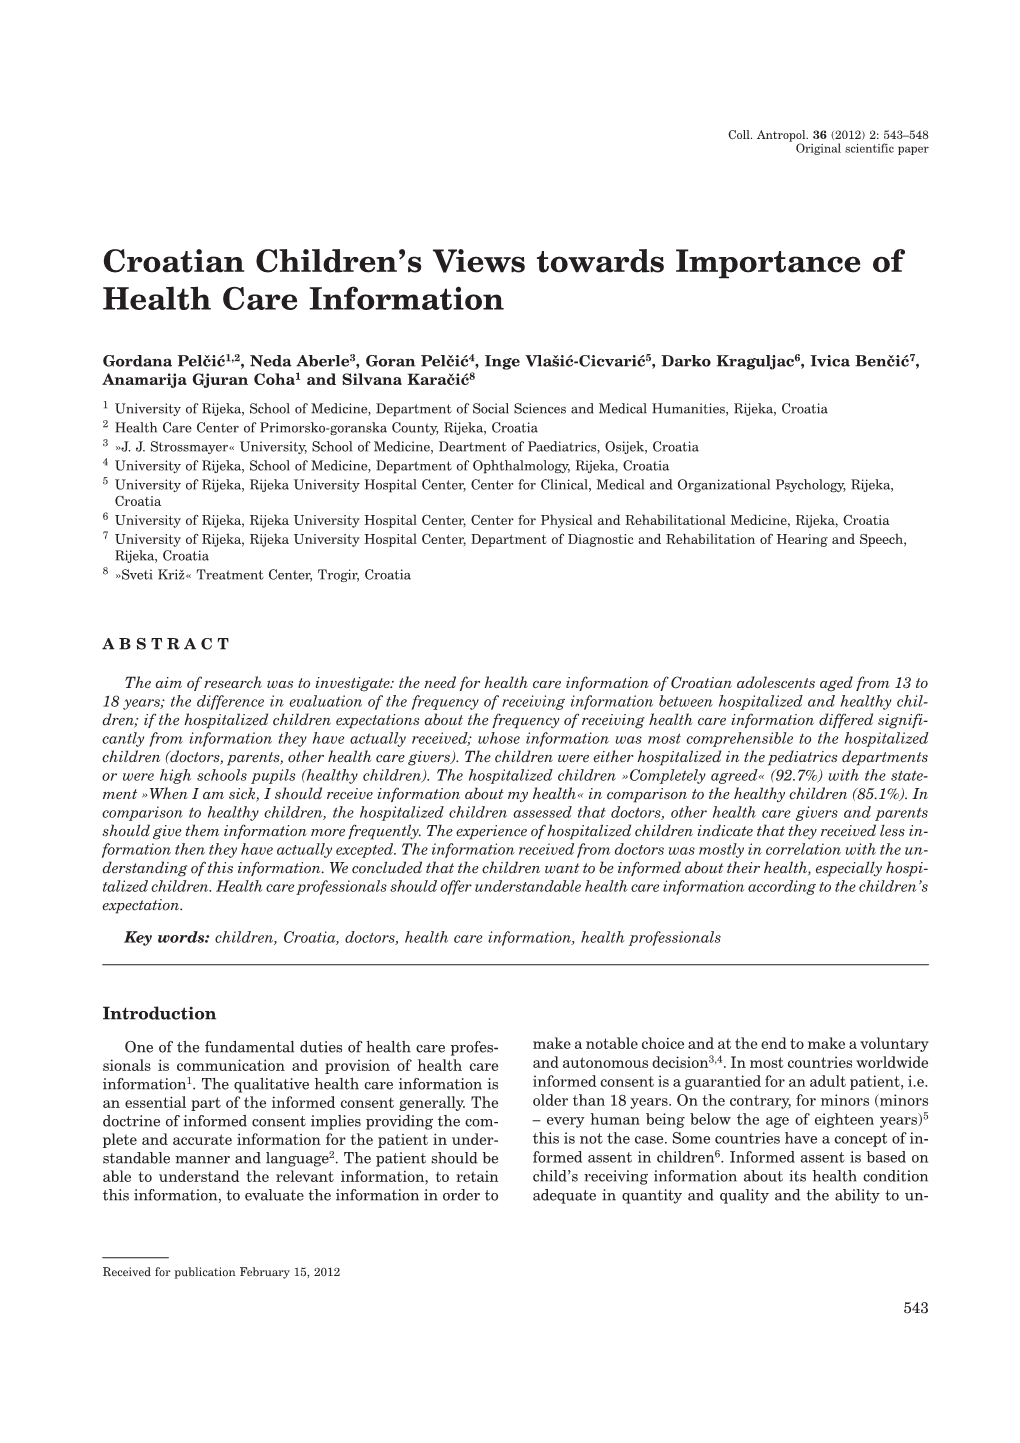 Croatian Children's Views Towards Importance of Health Care Information